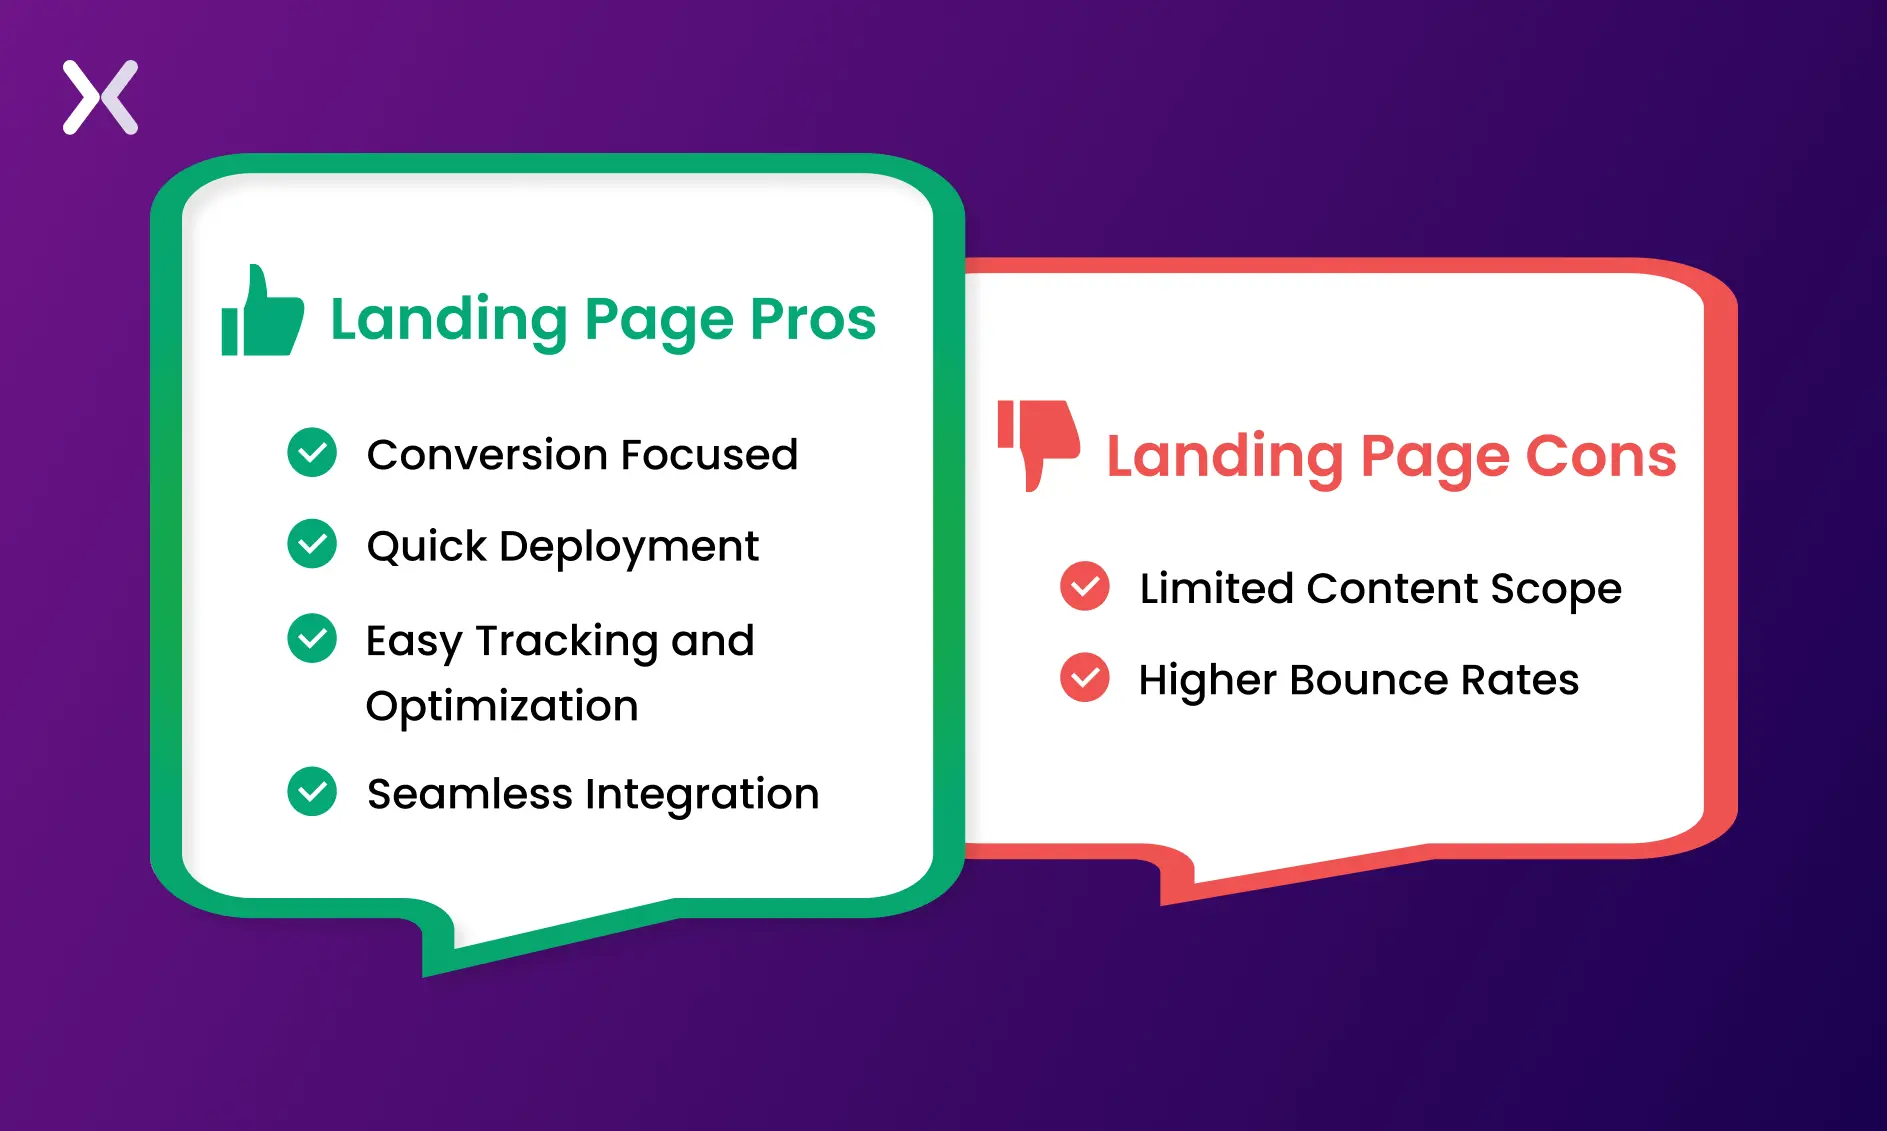 landing-page-pros-and-cons.webp